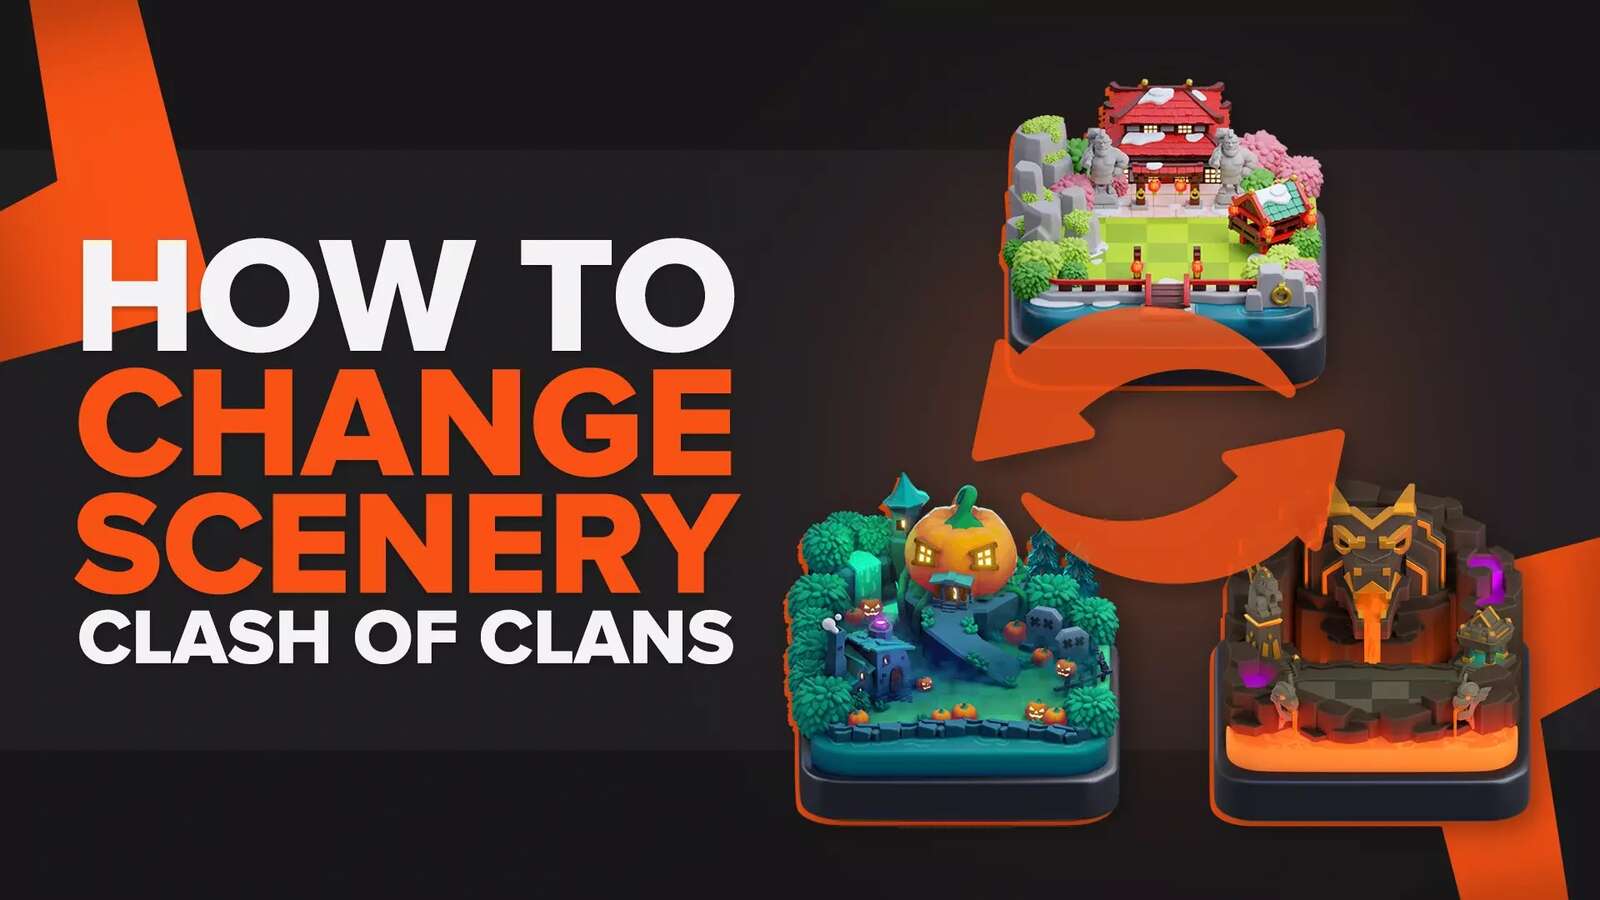 How To Change Scenery In Clash of Clans